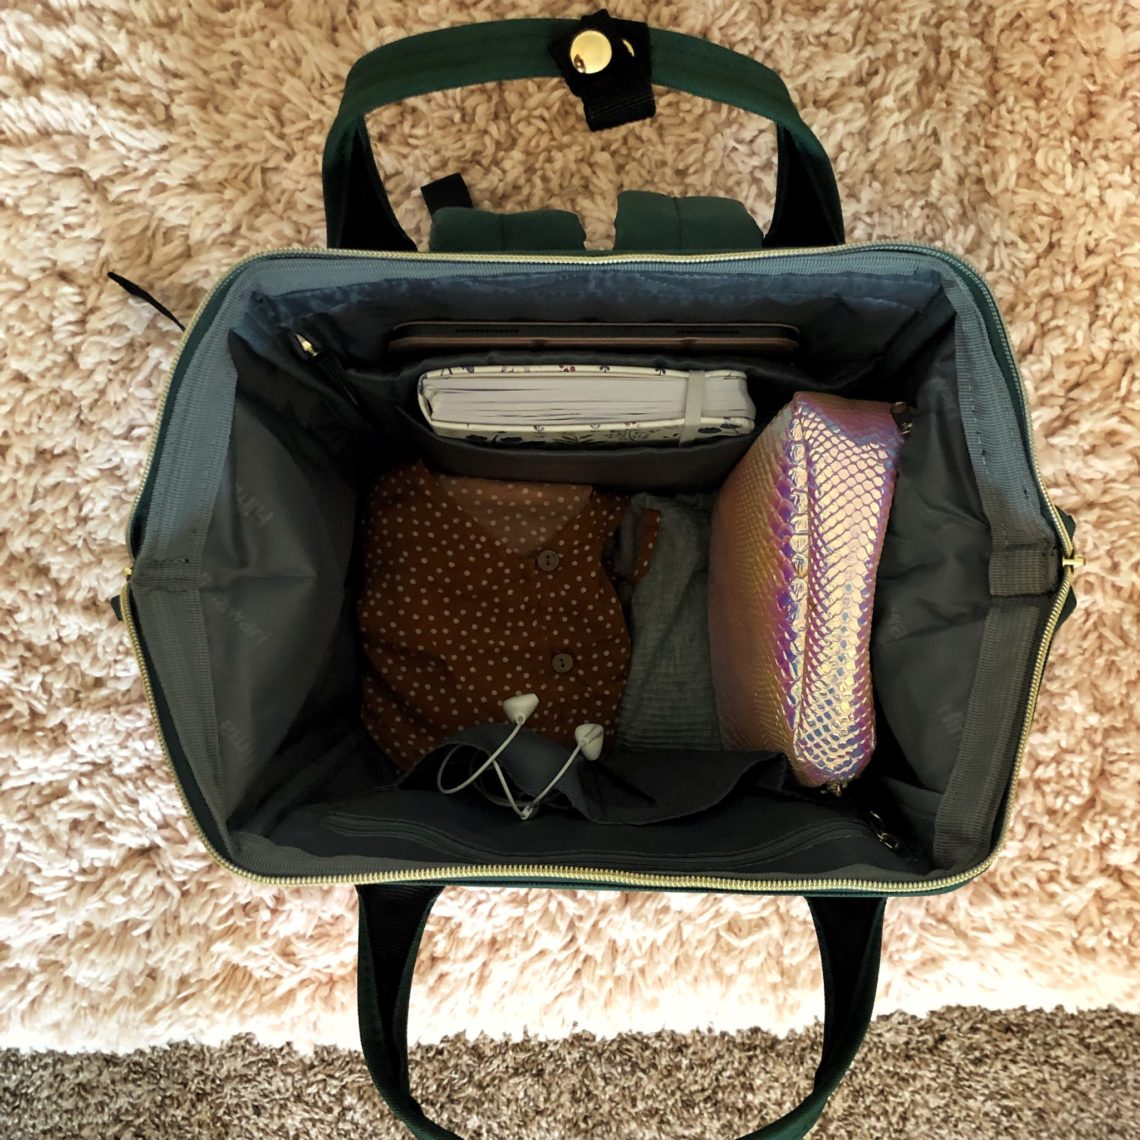 What I'm Packing for California - Rae's Daily Page